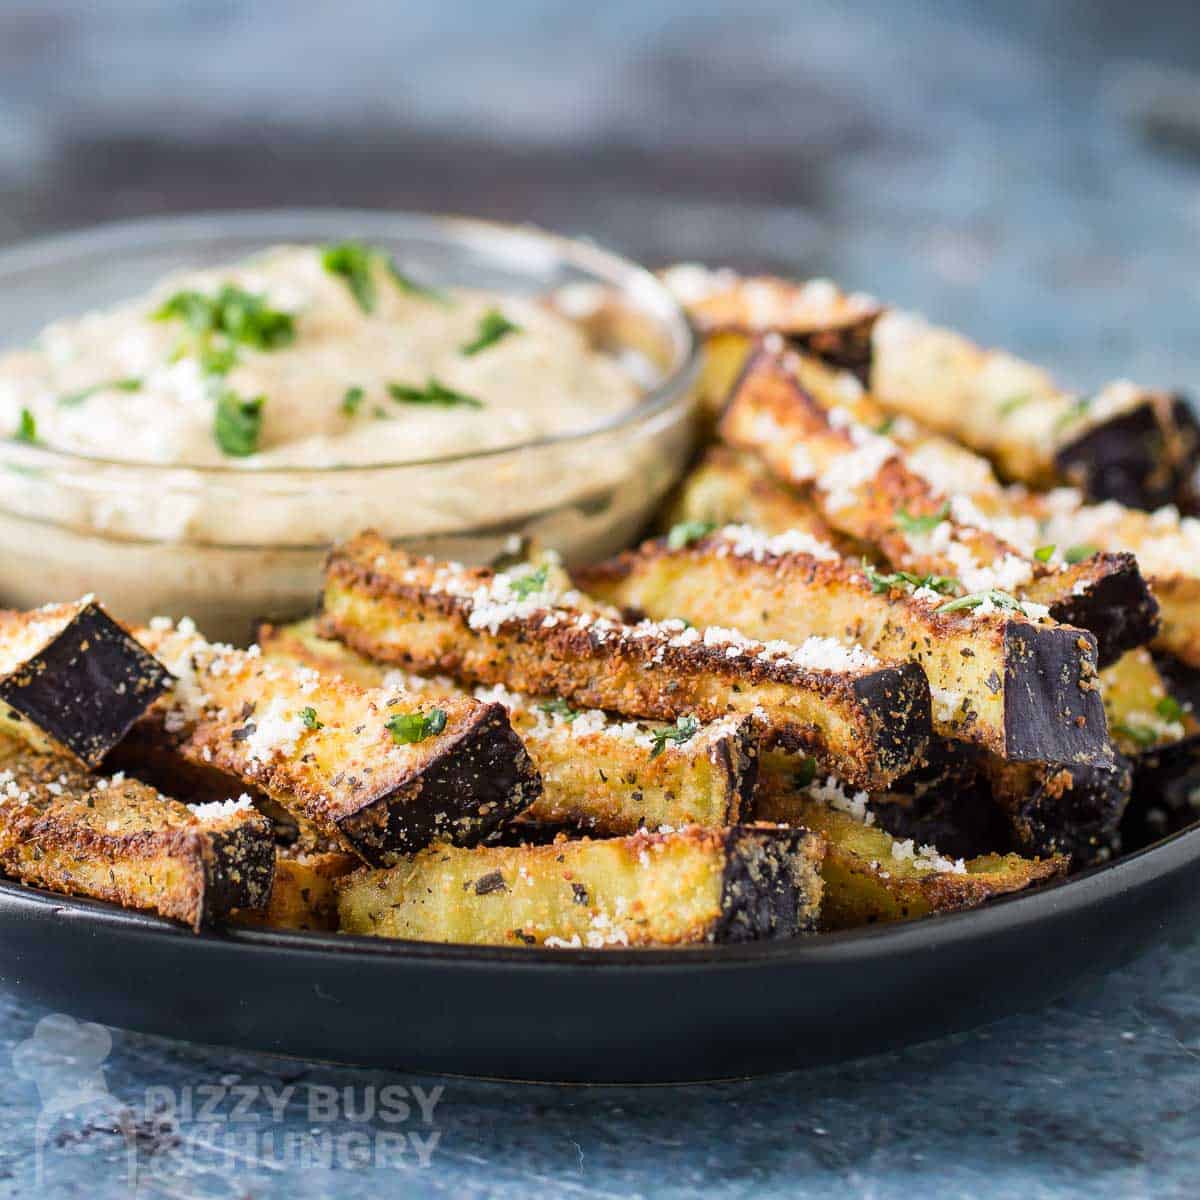 Side close up shot of eggplant fries garnished with basil and parmesan on a black plate with a clear bowl of chipotle basil dip garnished with more fresh basil.